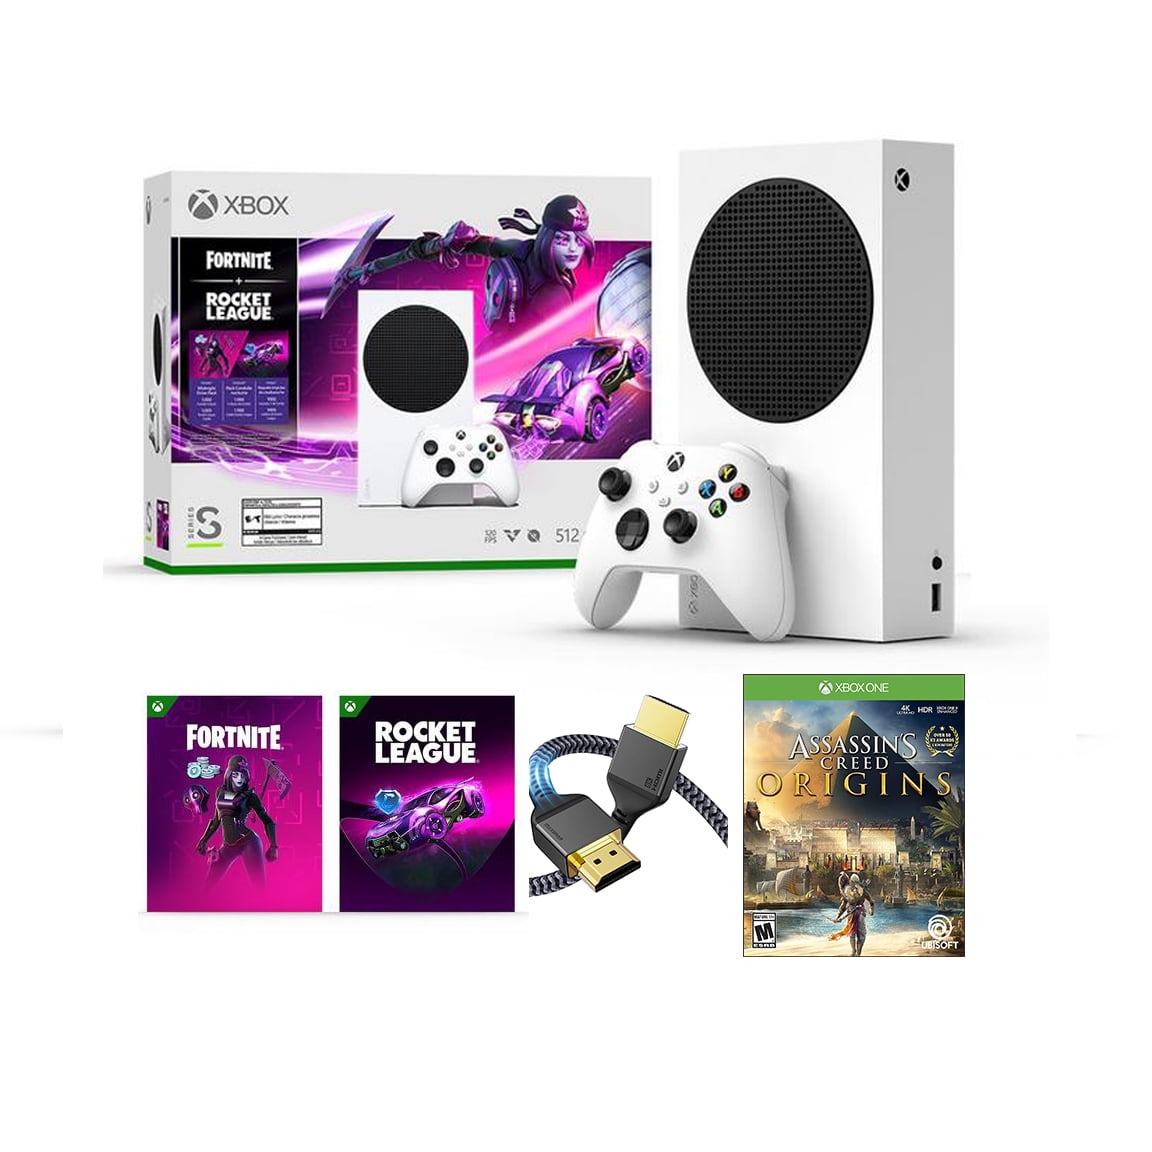 Xbox One Assassin's Creed Bundle Offers Two Free Games - Xbox Wire